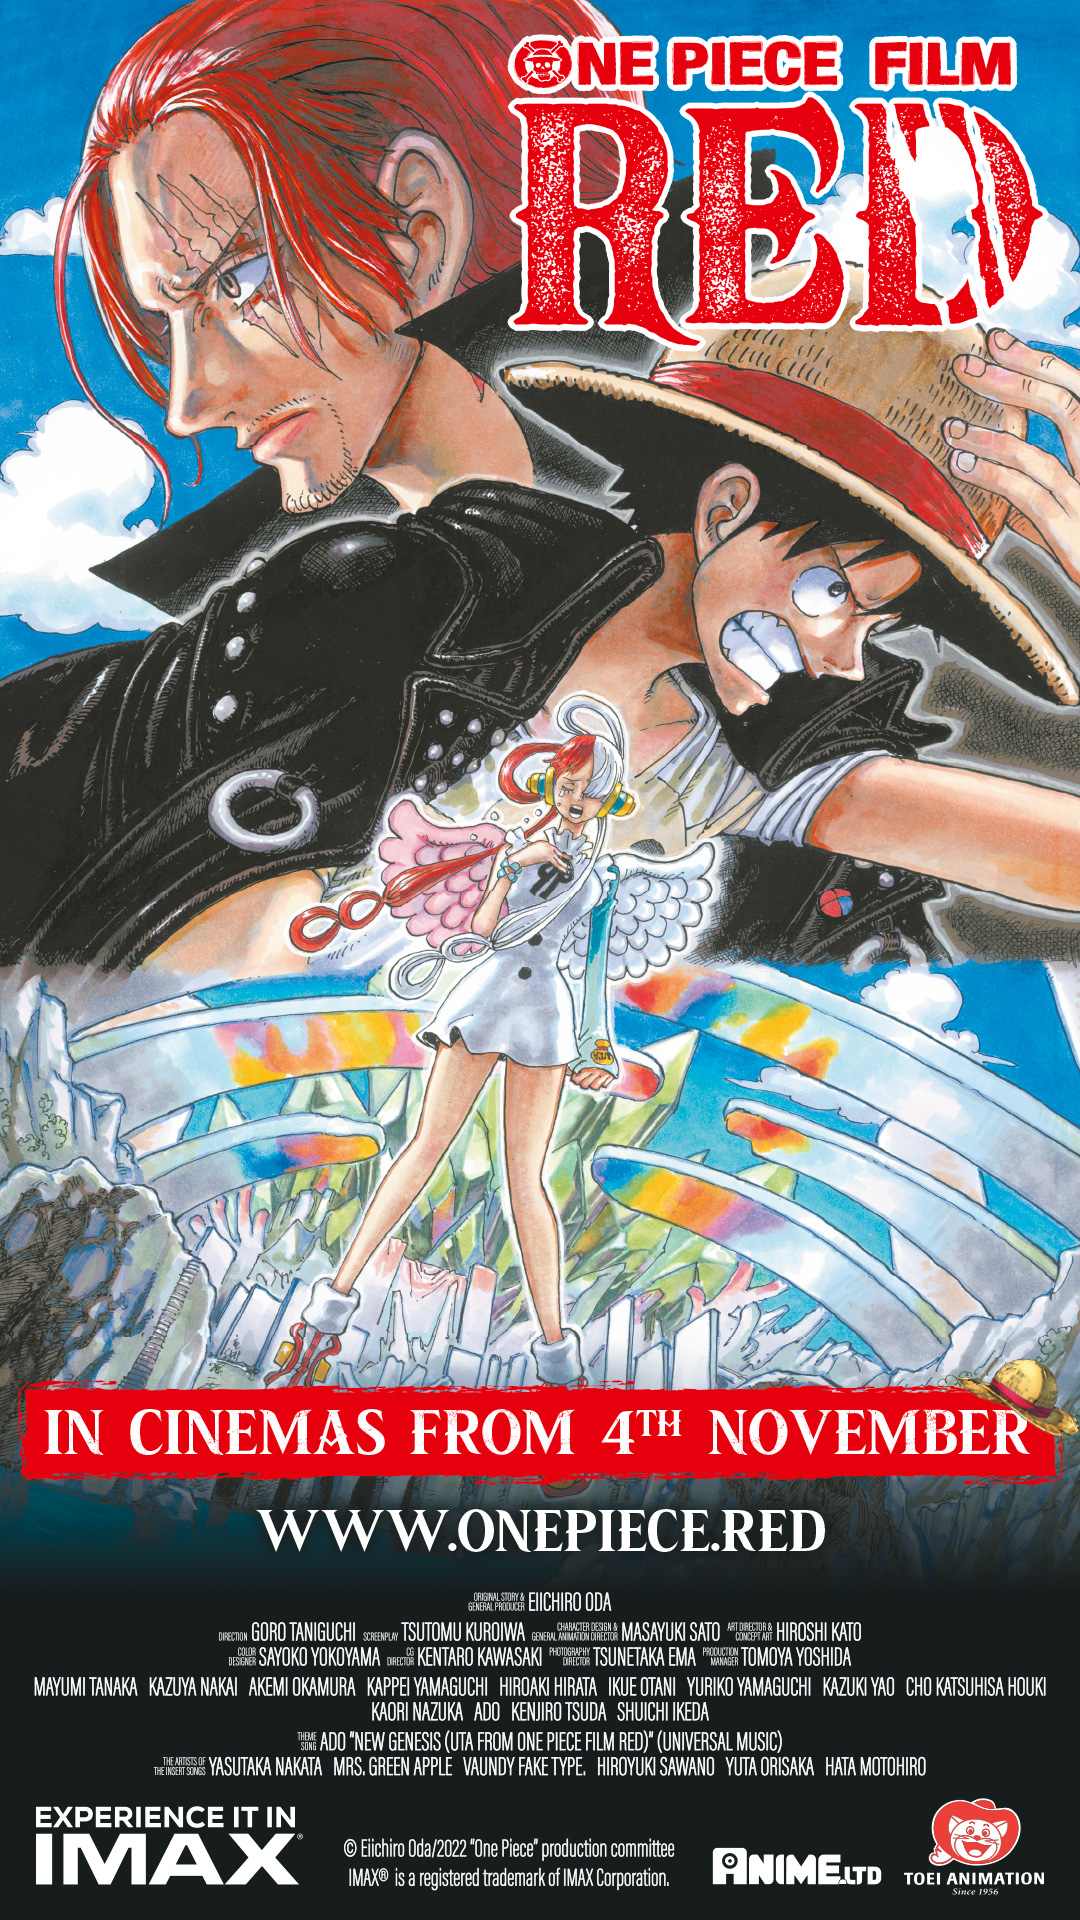 One Piece Film: Red showing in IMAX at Cineworld